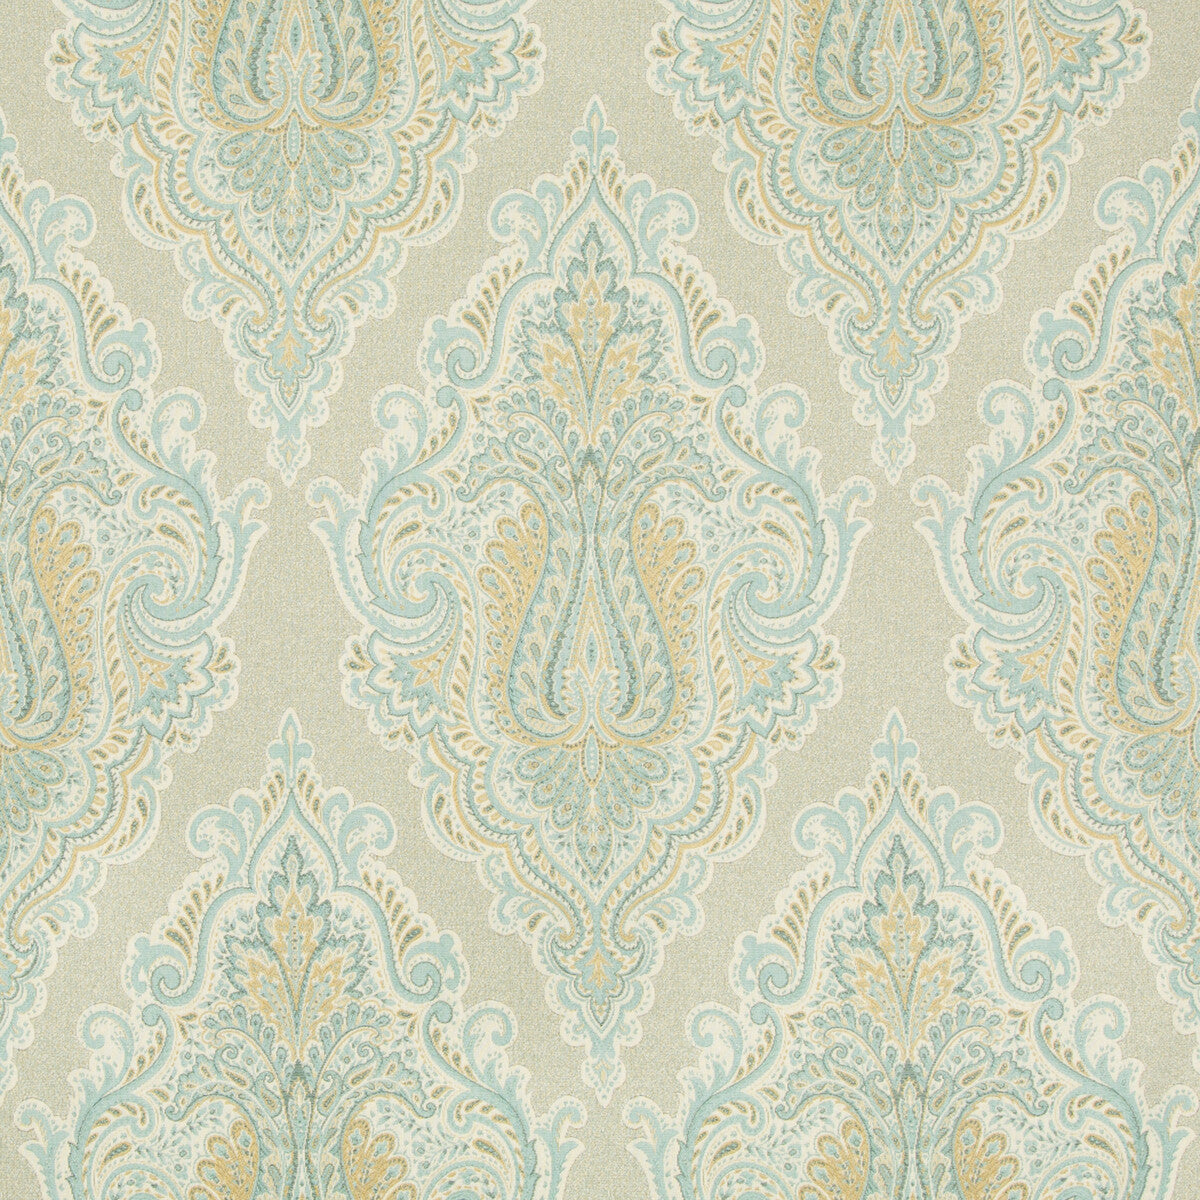 Kravet Design fabric in 34679-135 color - pattern 34679.135.0 - by Kravet Design in the Crypton Home collection